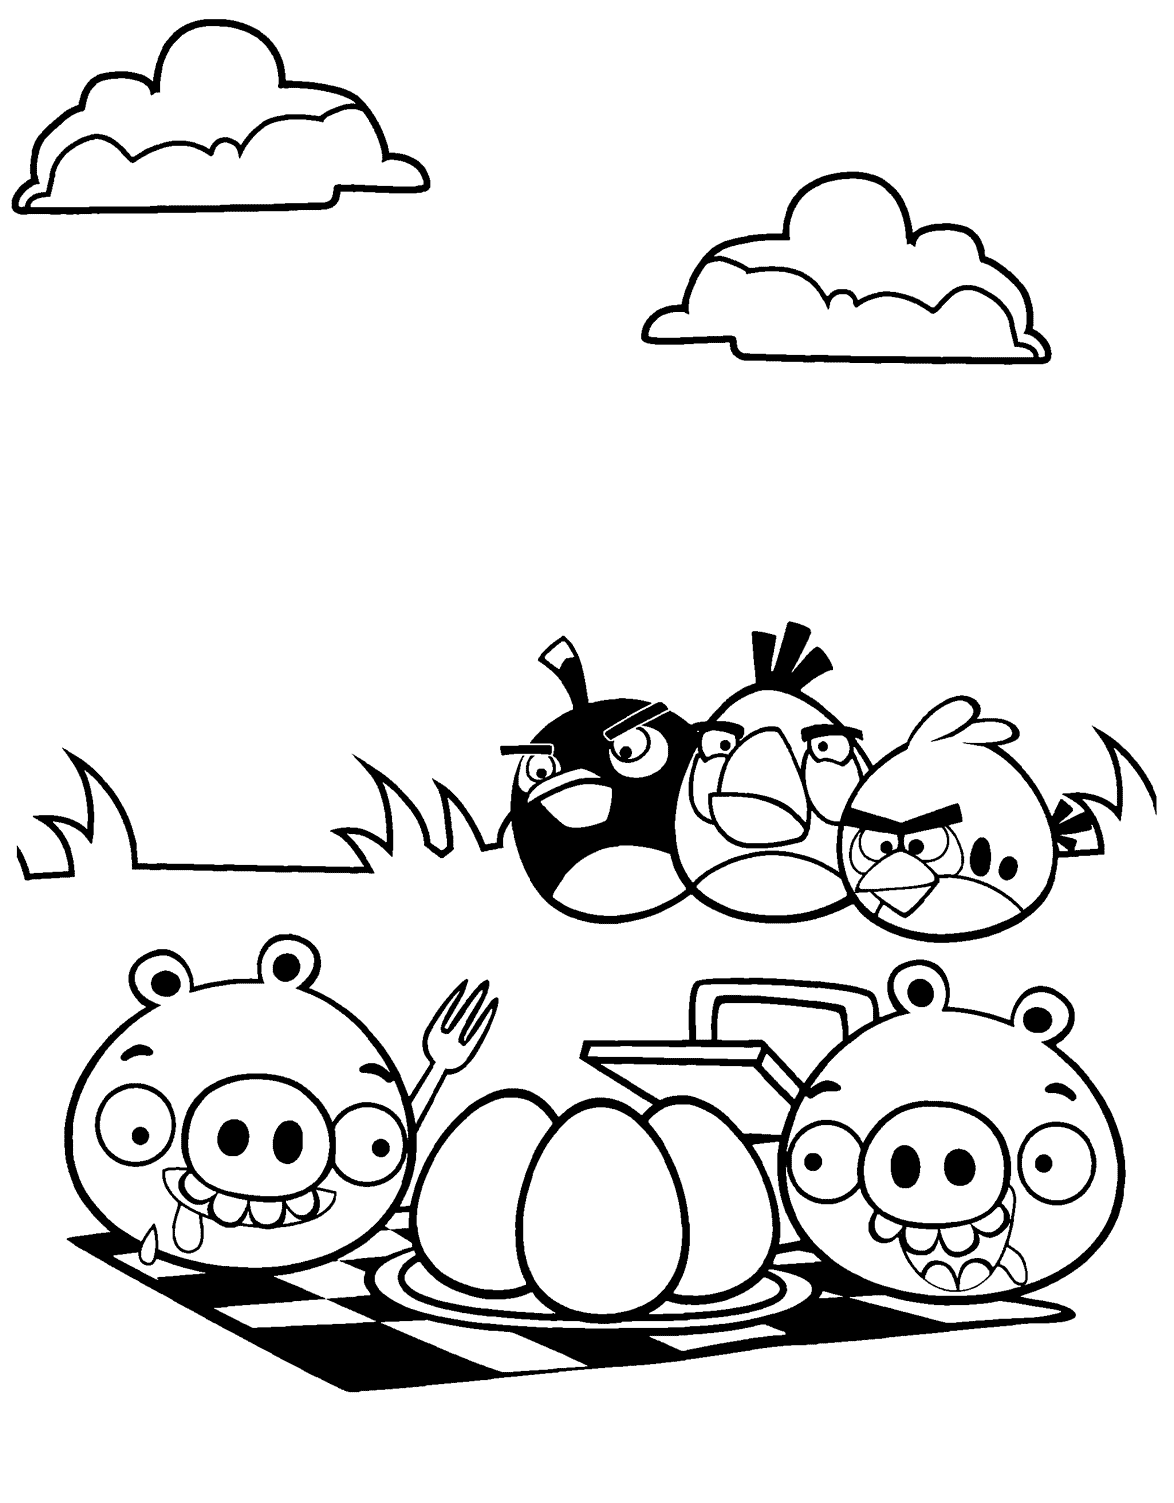 Birds And Pigs Coloring Page - Free Printable Coloring Pages for Kids